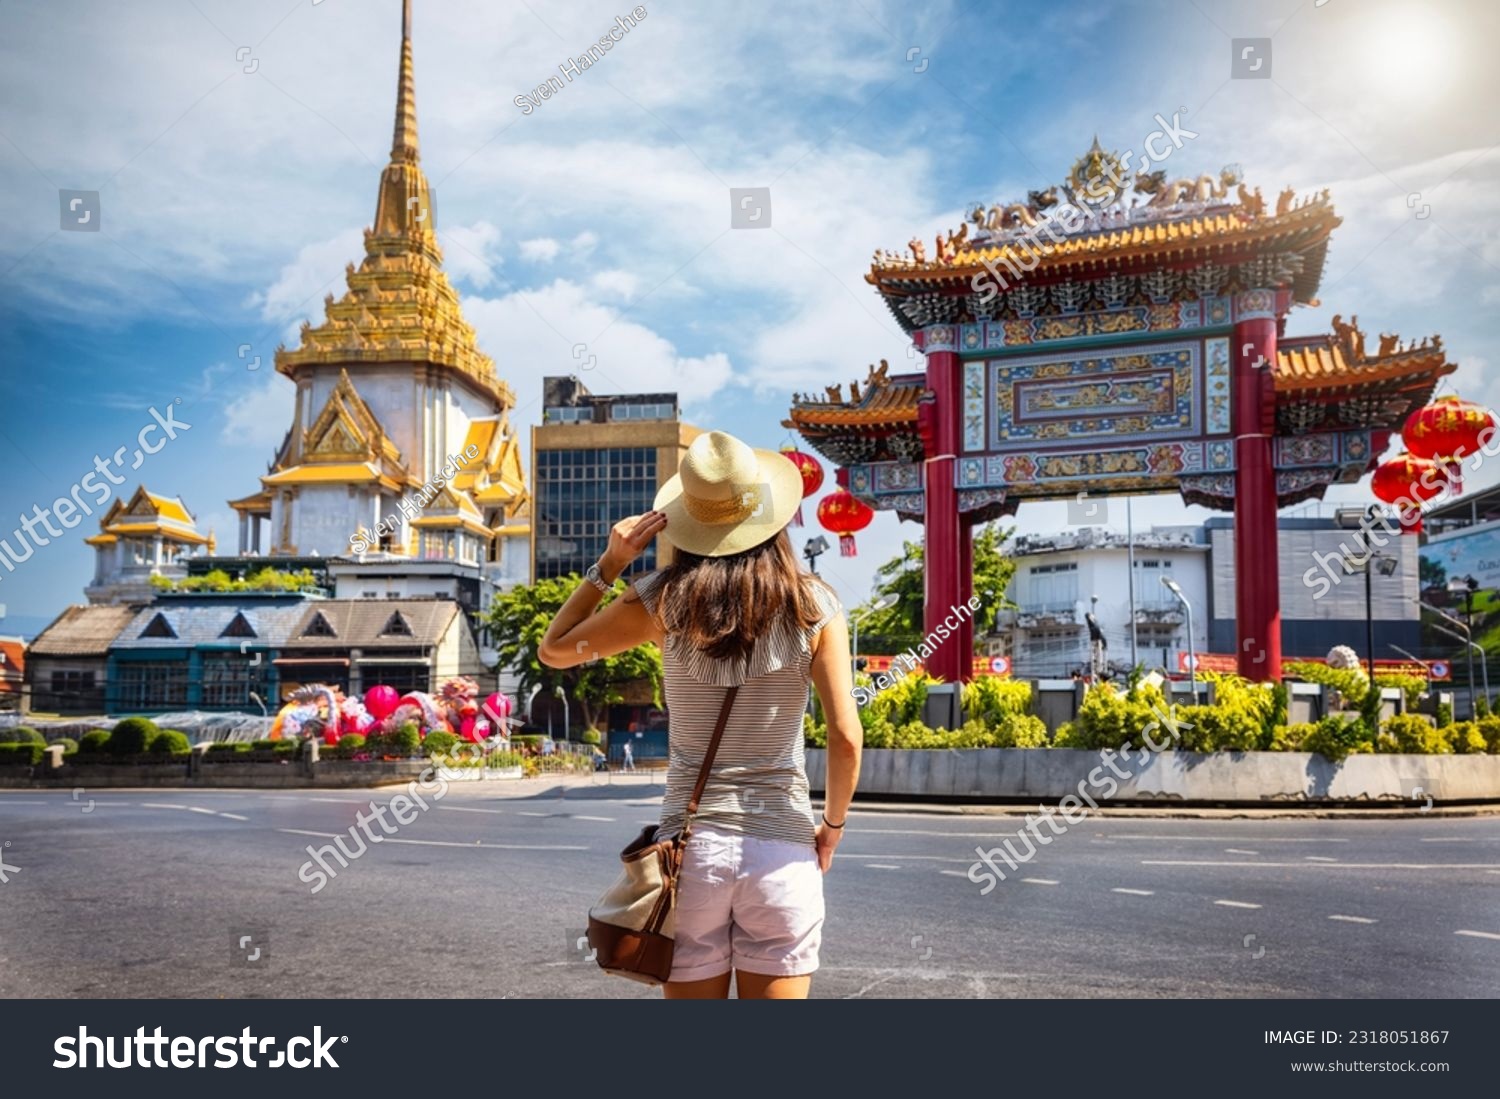 A tourist woman on sightseeing tour stands in front of the Chinatown Gate at the famous Yaowarat Road, Bangkok, Thailand #2318051867